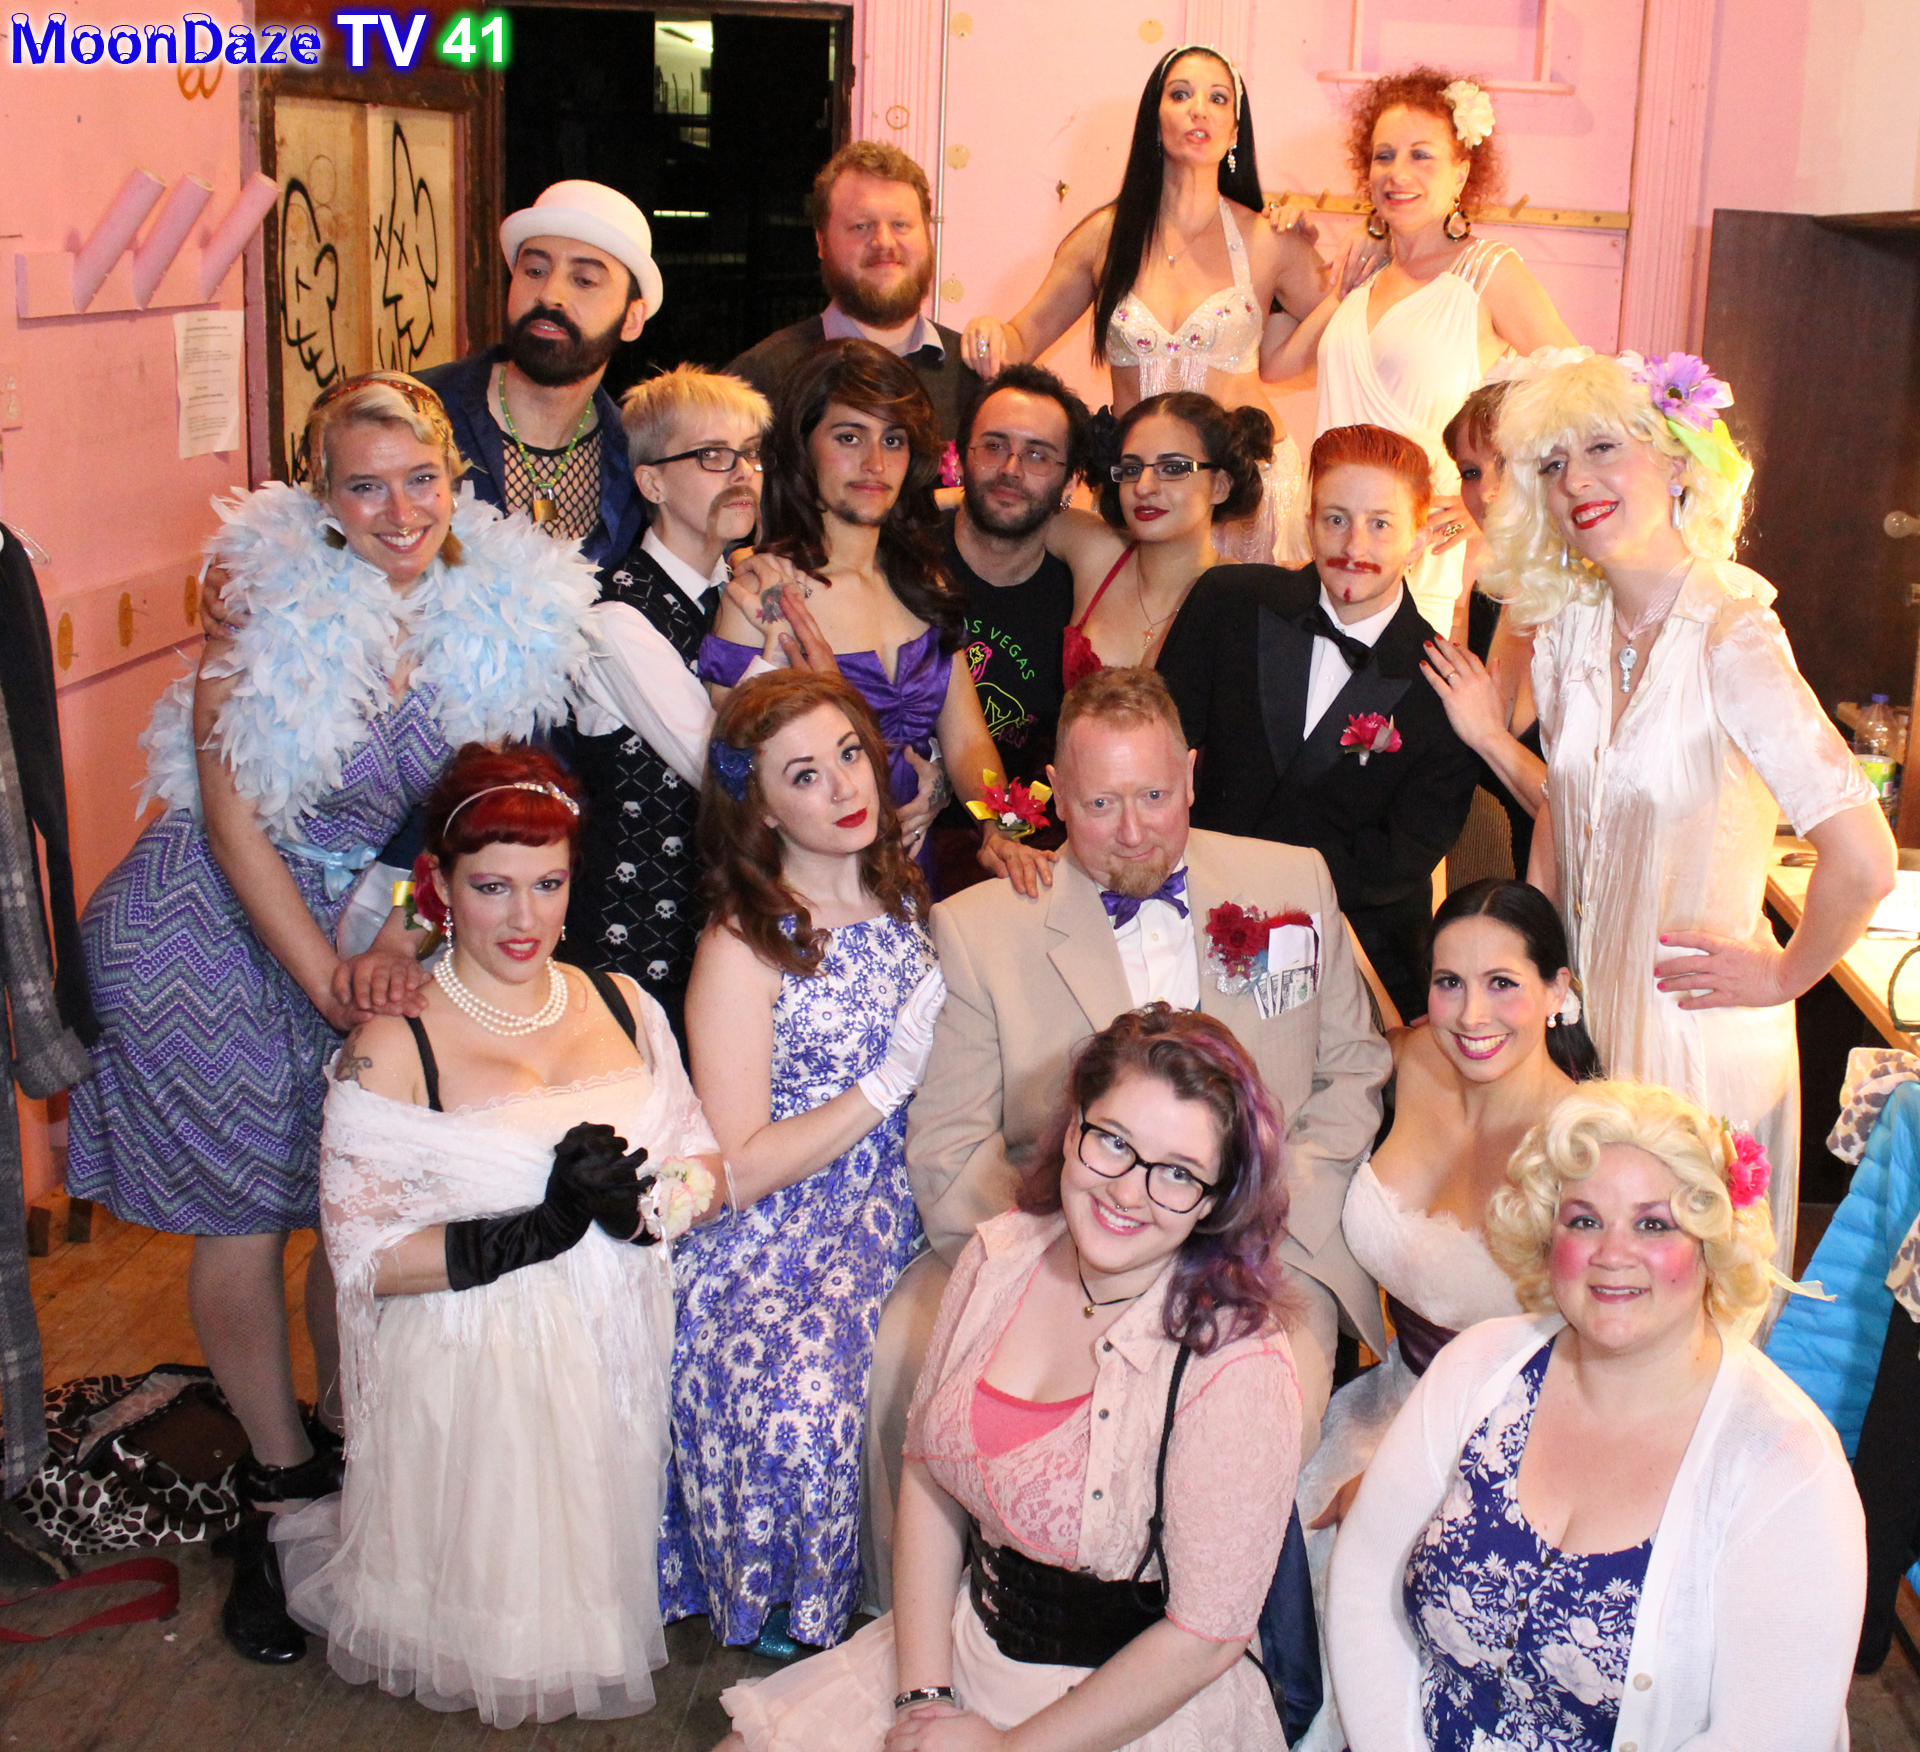 MoonDaze TV 41 - Chastity Ball with Breck Stewart featuring Velma Cabriole and #CandyassCabaret #RealityShow #Season03